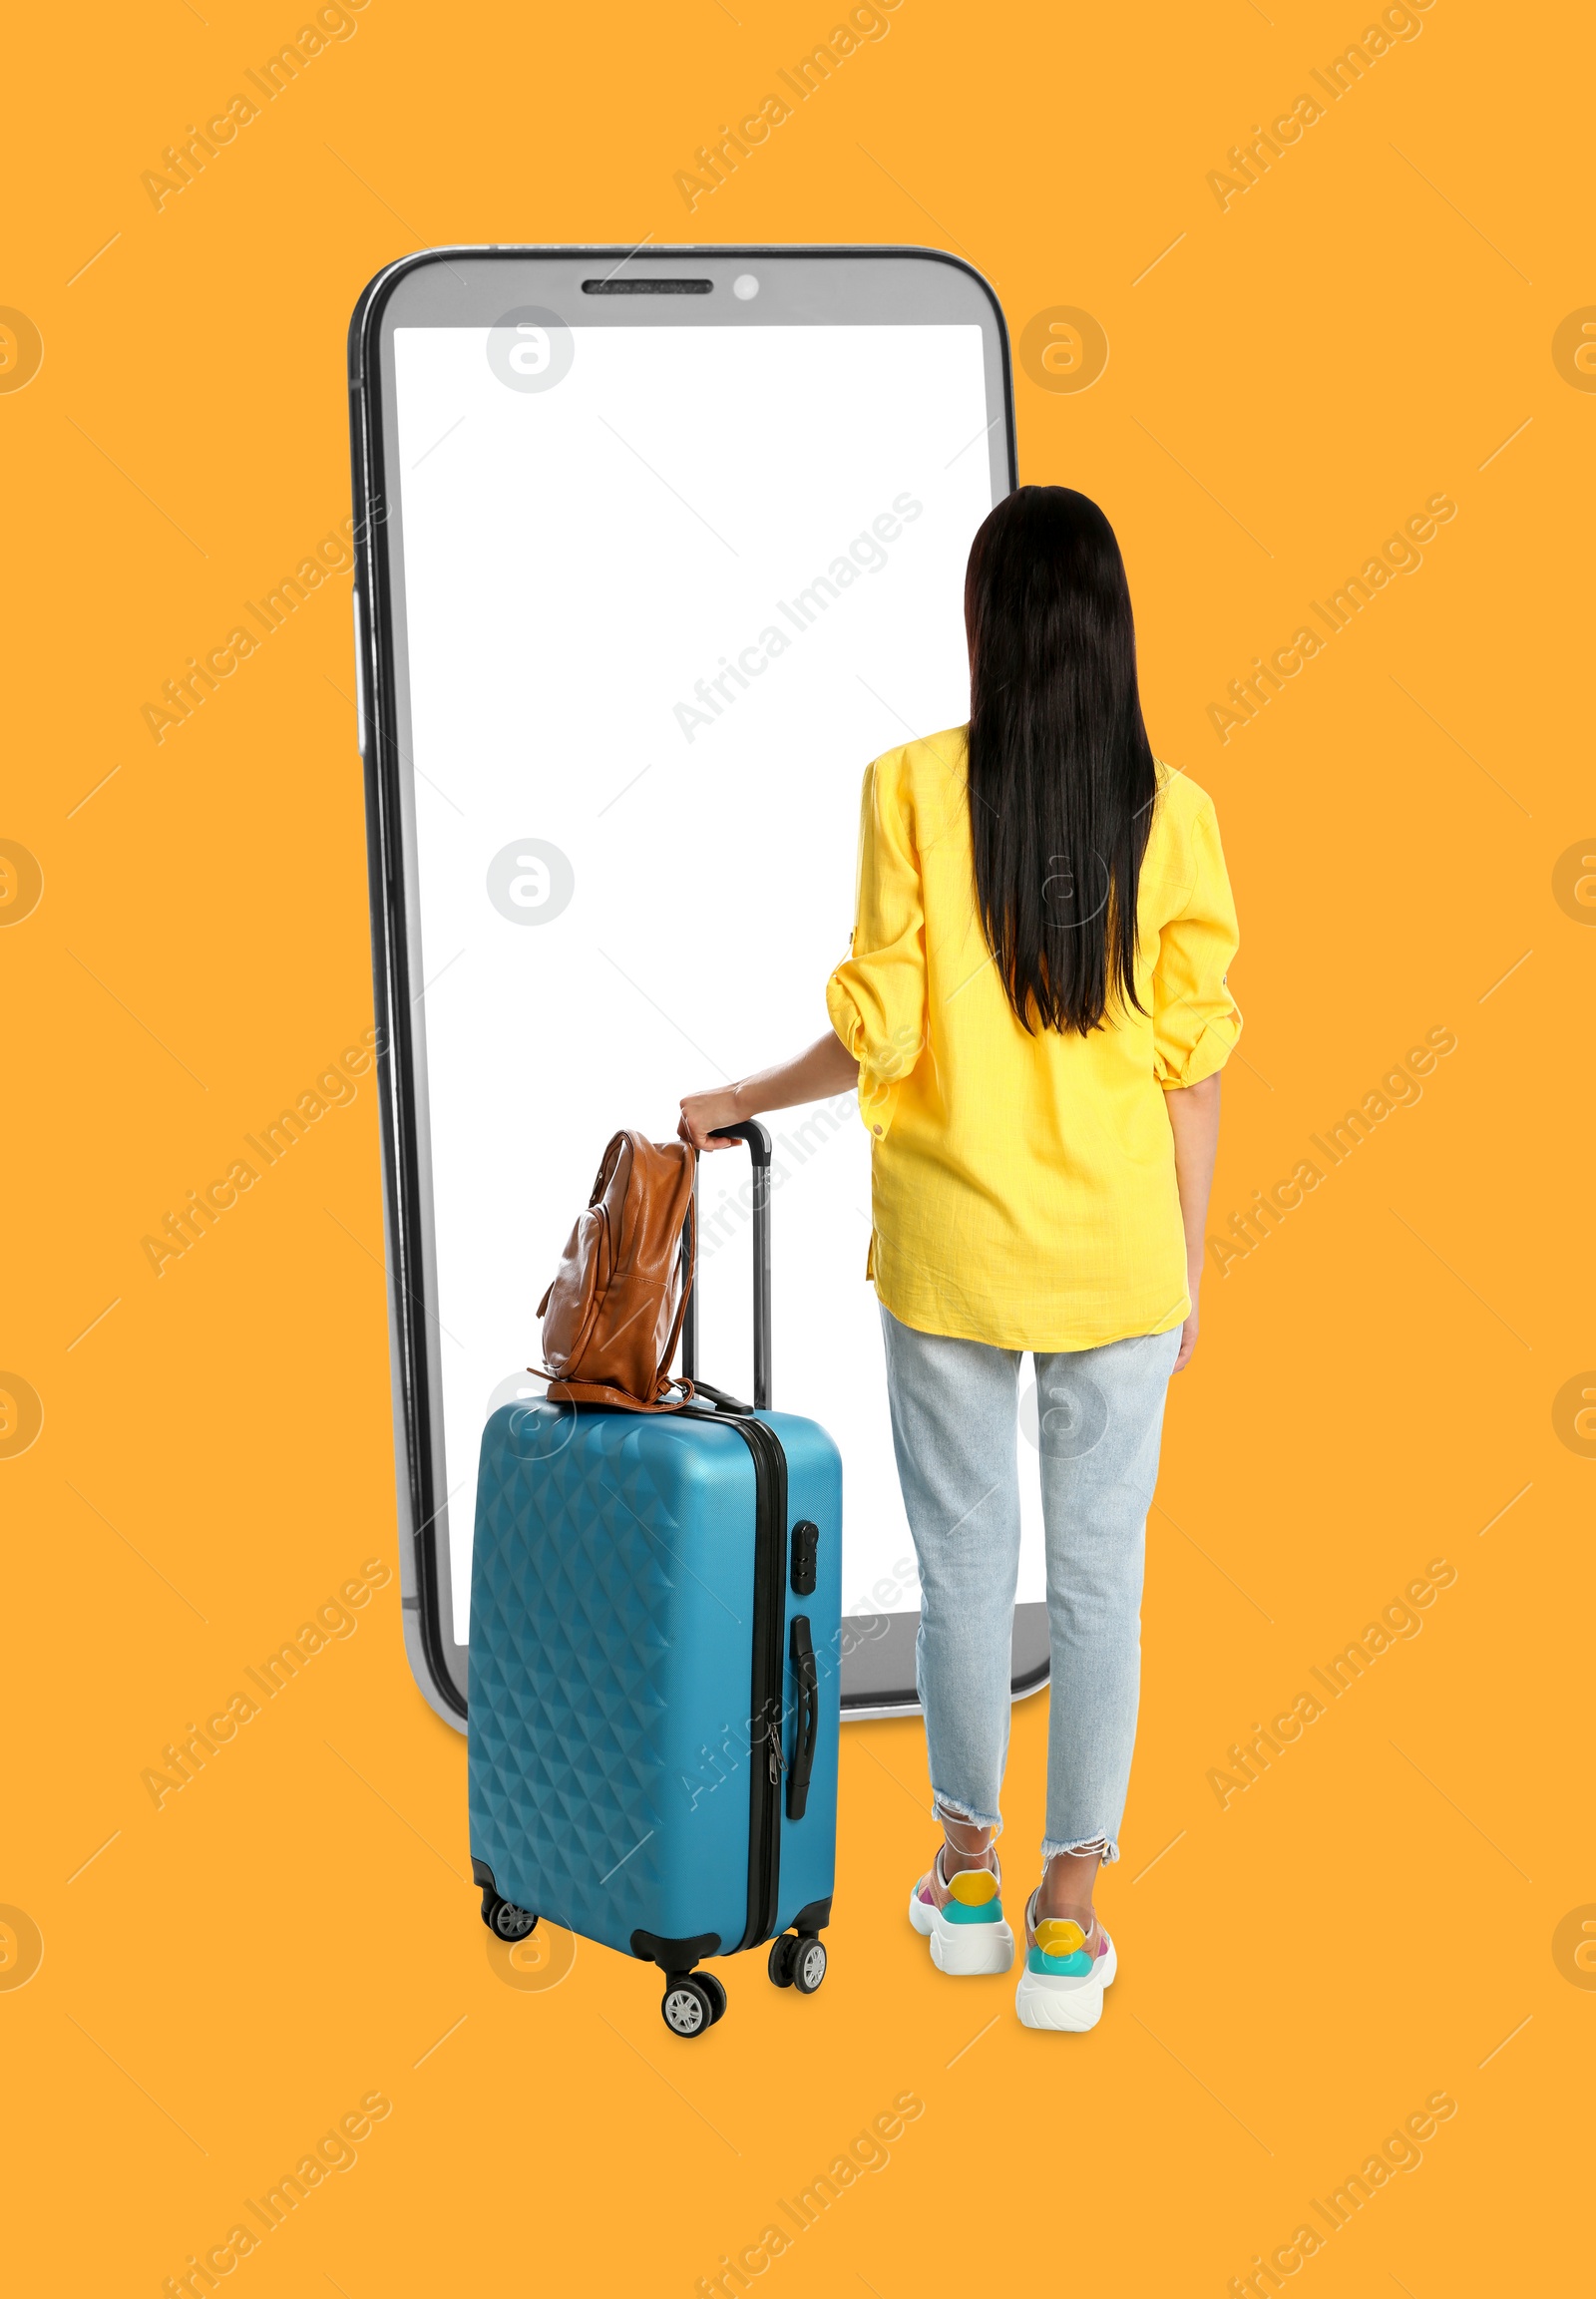 Image of Traveler with suitcase standing in front of big smartphone on orange background